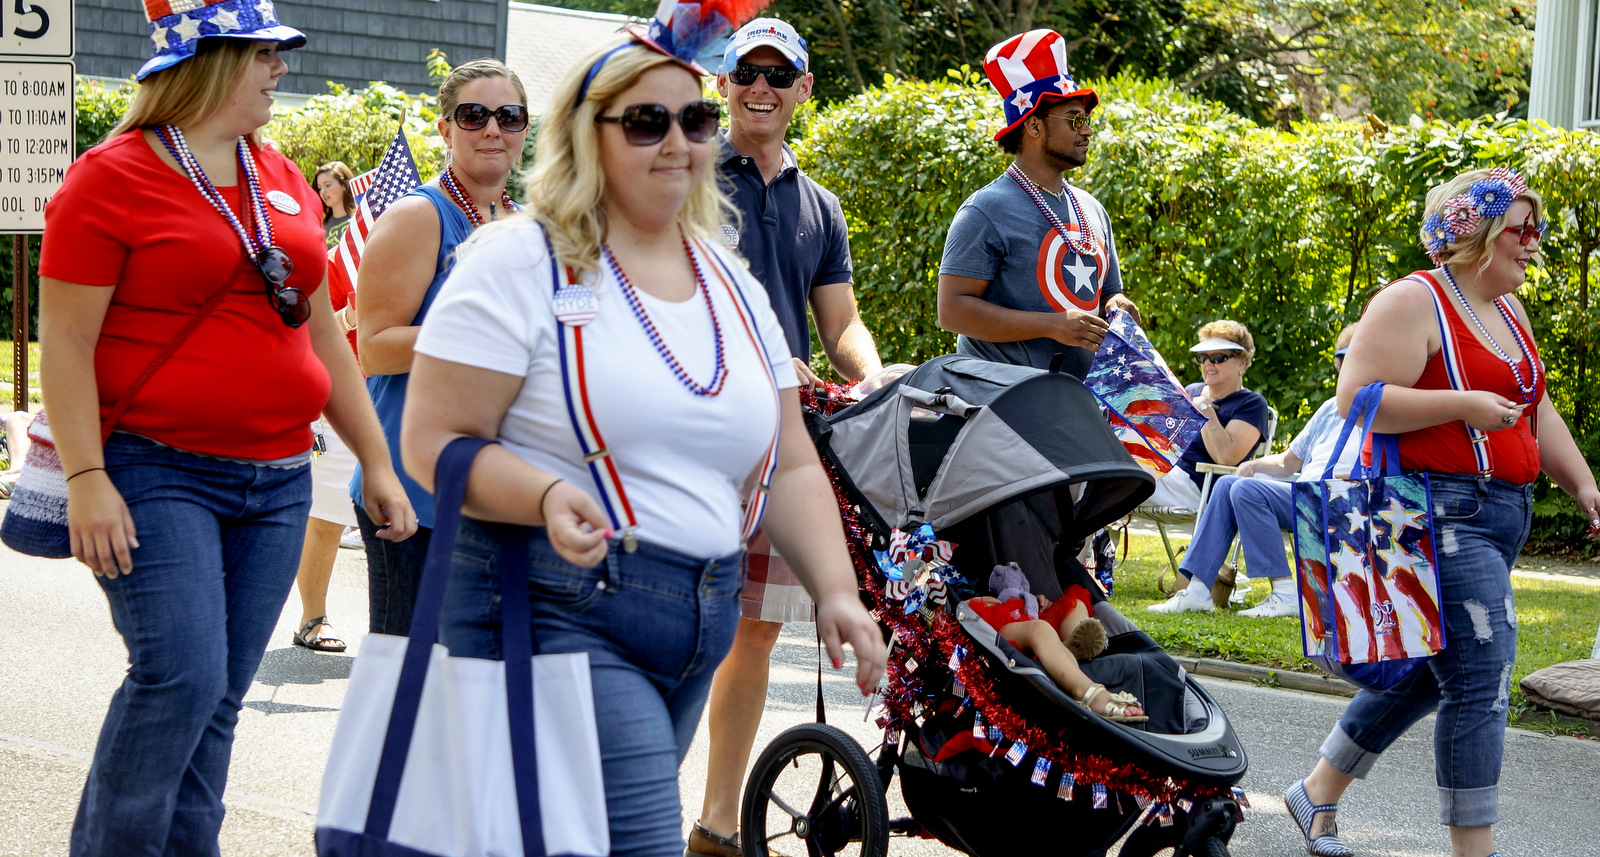 Titusville residents take part in the 2014 Oil Festival and Parade in Titusville. (Photo: Cathy Smith/uniquelycat/Flickr)